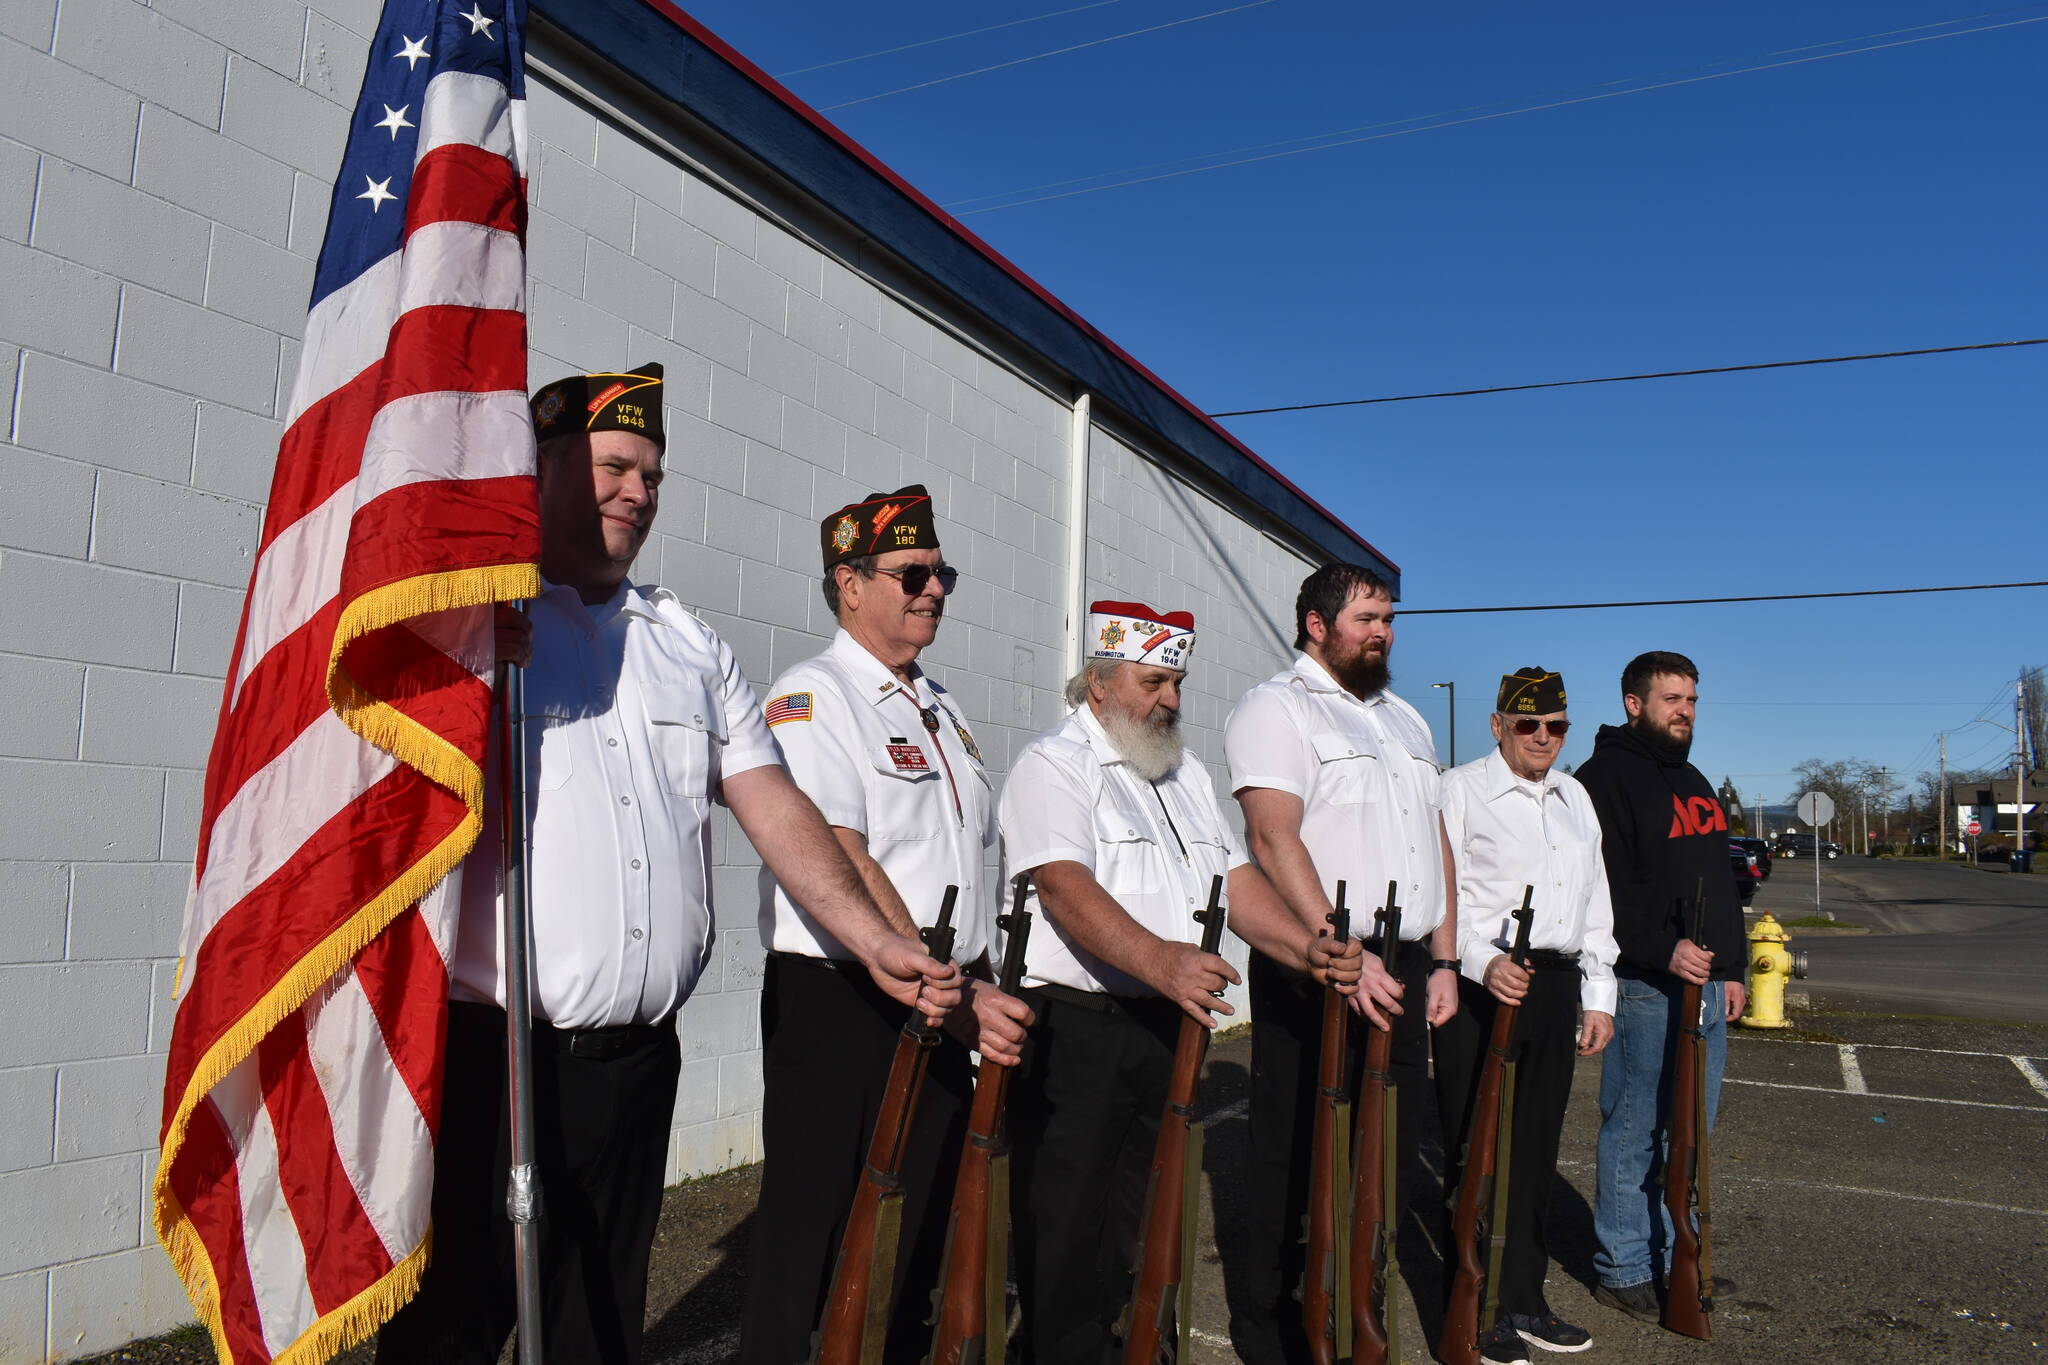 Elma VFW Bill Mann Post 1948 members (from left to right) Jim Mears, Tyler Marriott, Bill Wickwire, Cody Fries, Chuck McLane and Brad Dendy line up with an American flag and the seven ceremonial M1 Garand rifles that, once stolen, have since been recovered. The members couldn’t be more relieved. Matthew N. Wells | The Daily World